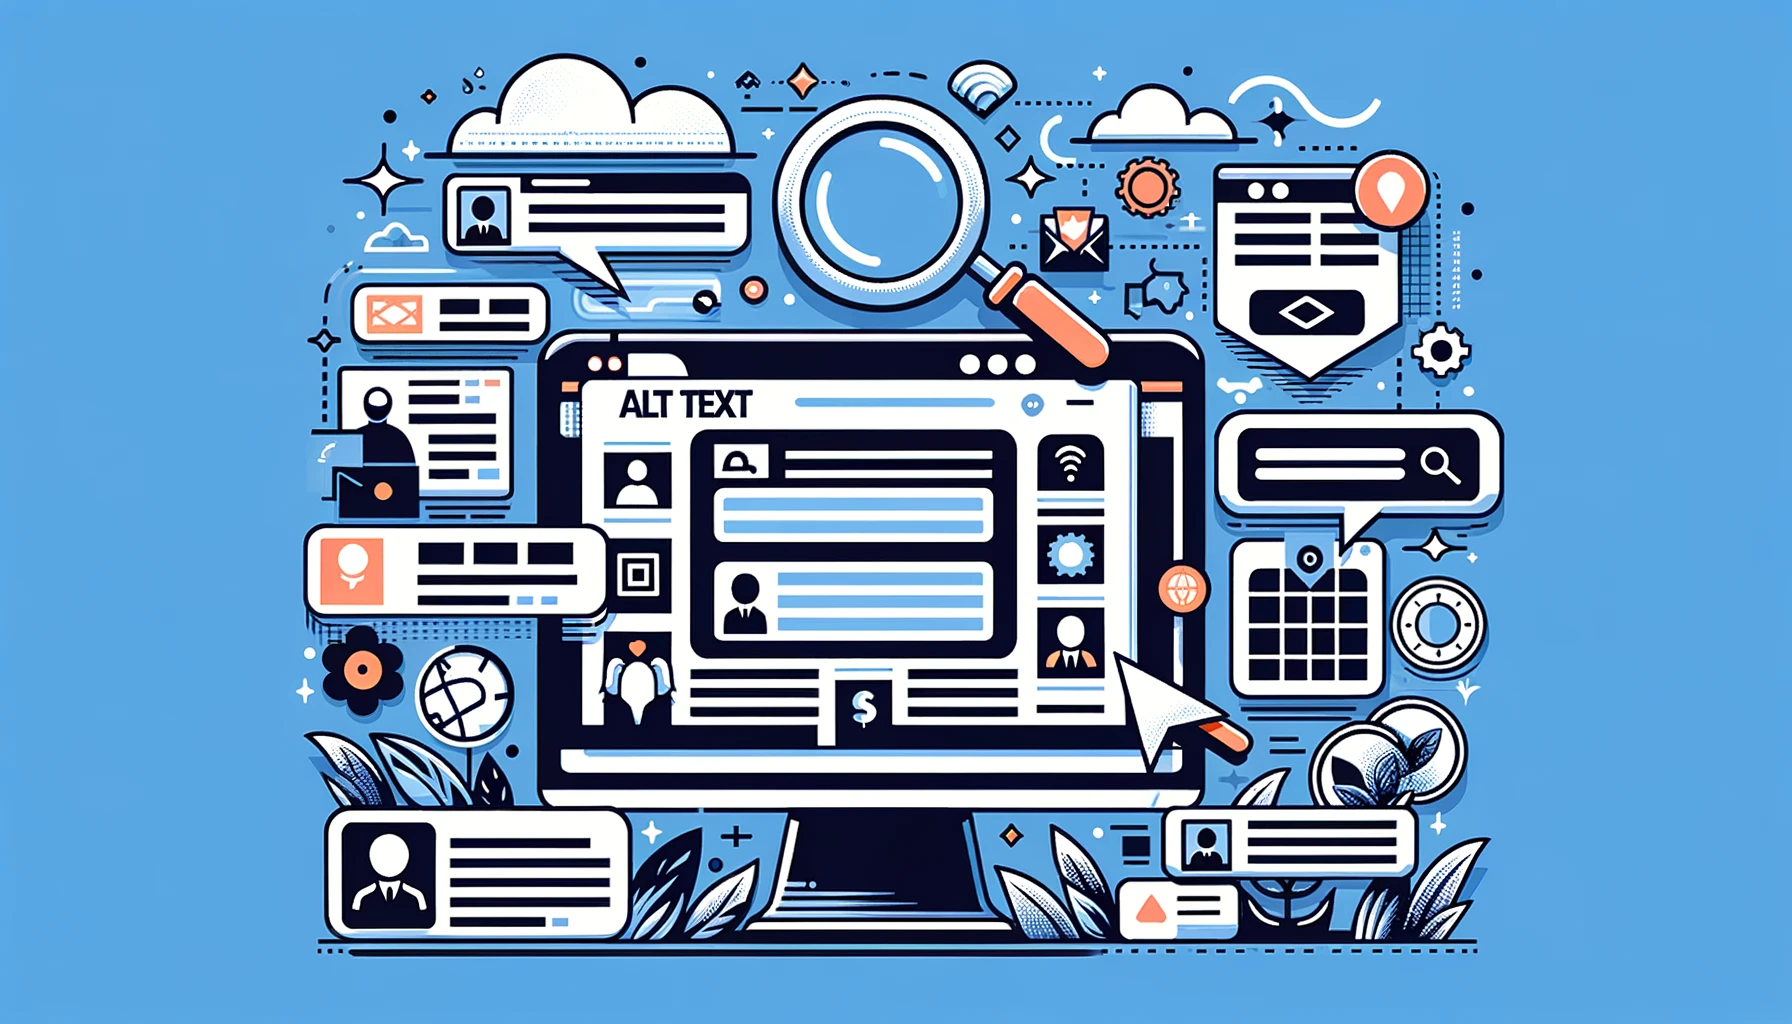 Illustration of various web and SEO related elements, including a magnifying glass over a computer screen, website profiles, mobile devices, and social media icons, set against a blue background to represent digital optimization and search engine strategies.